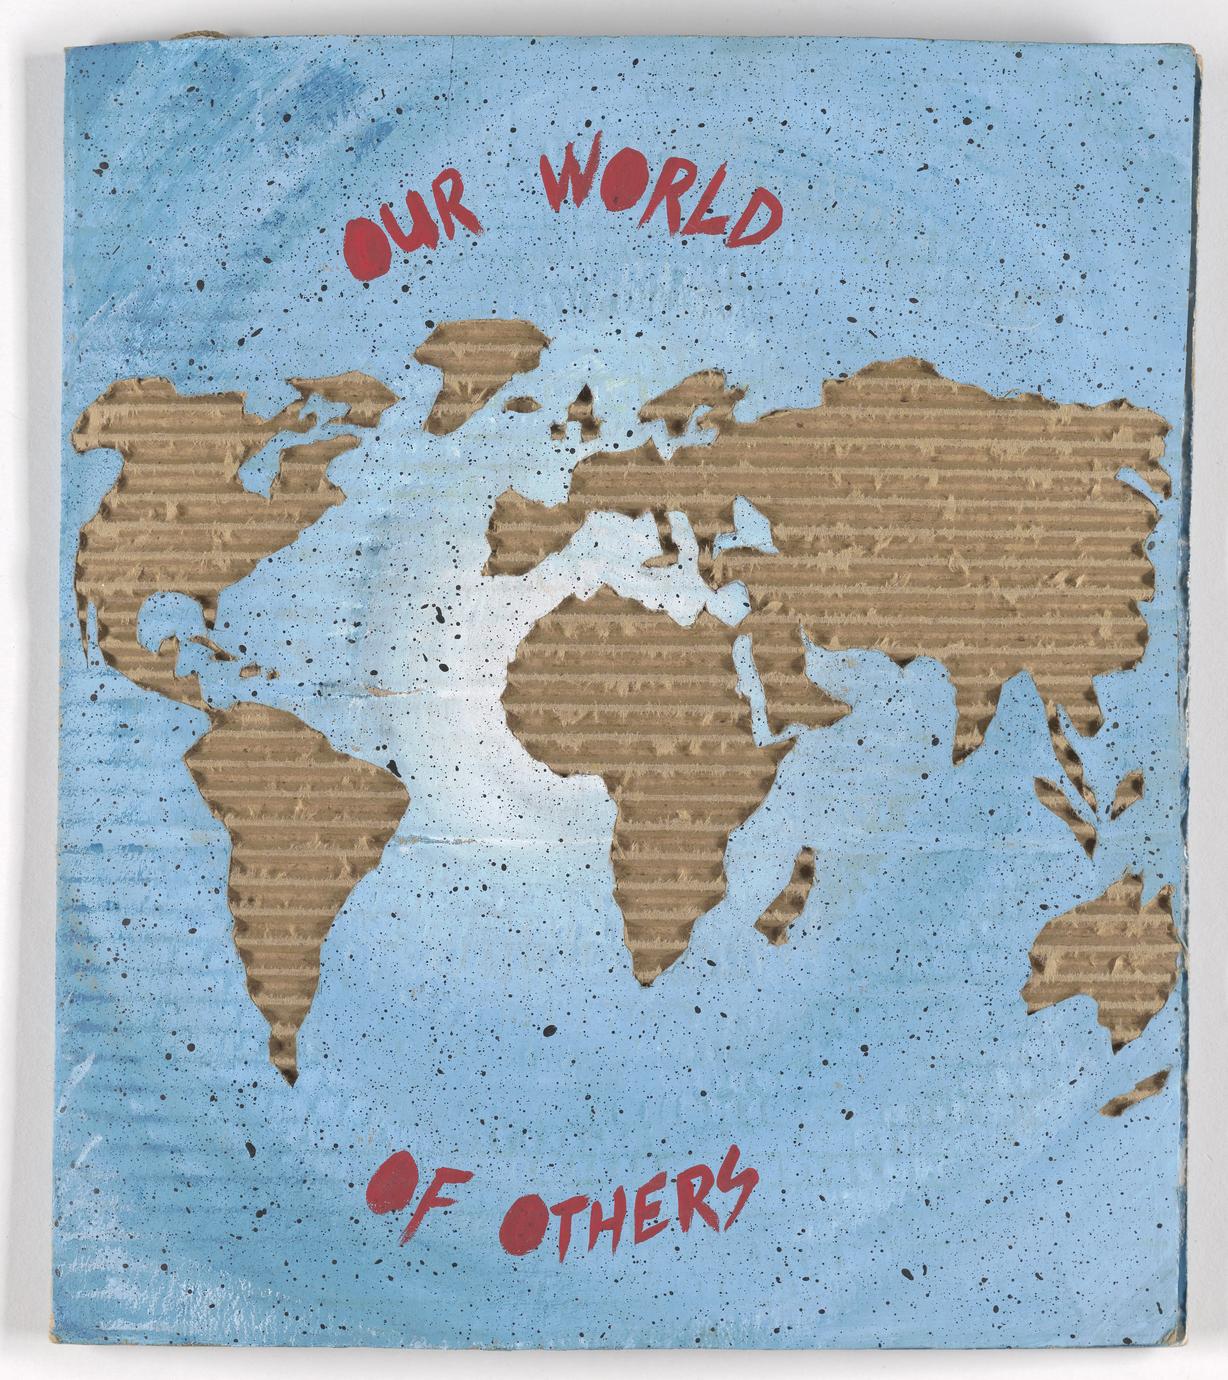 Our world of others (1 of 4)